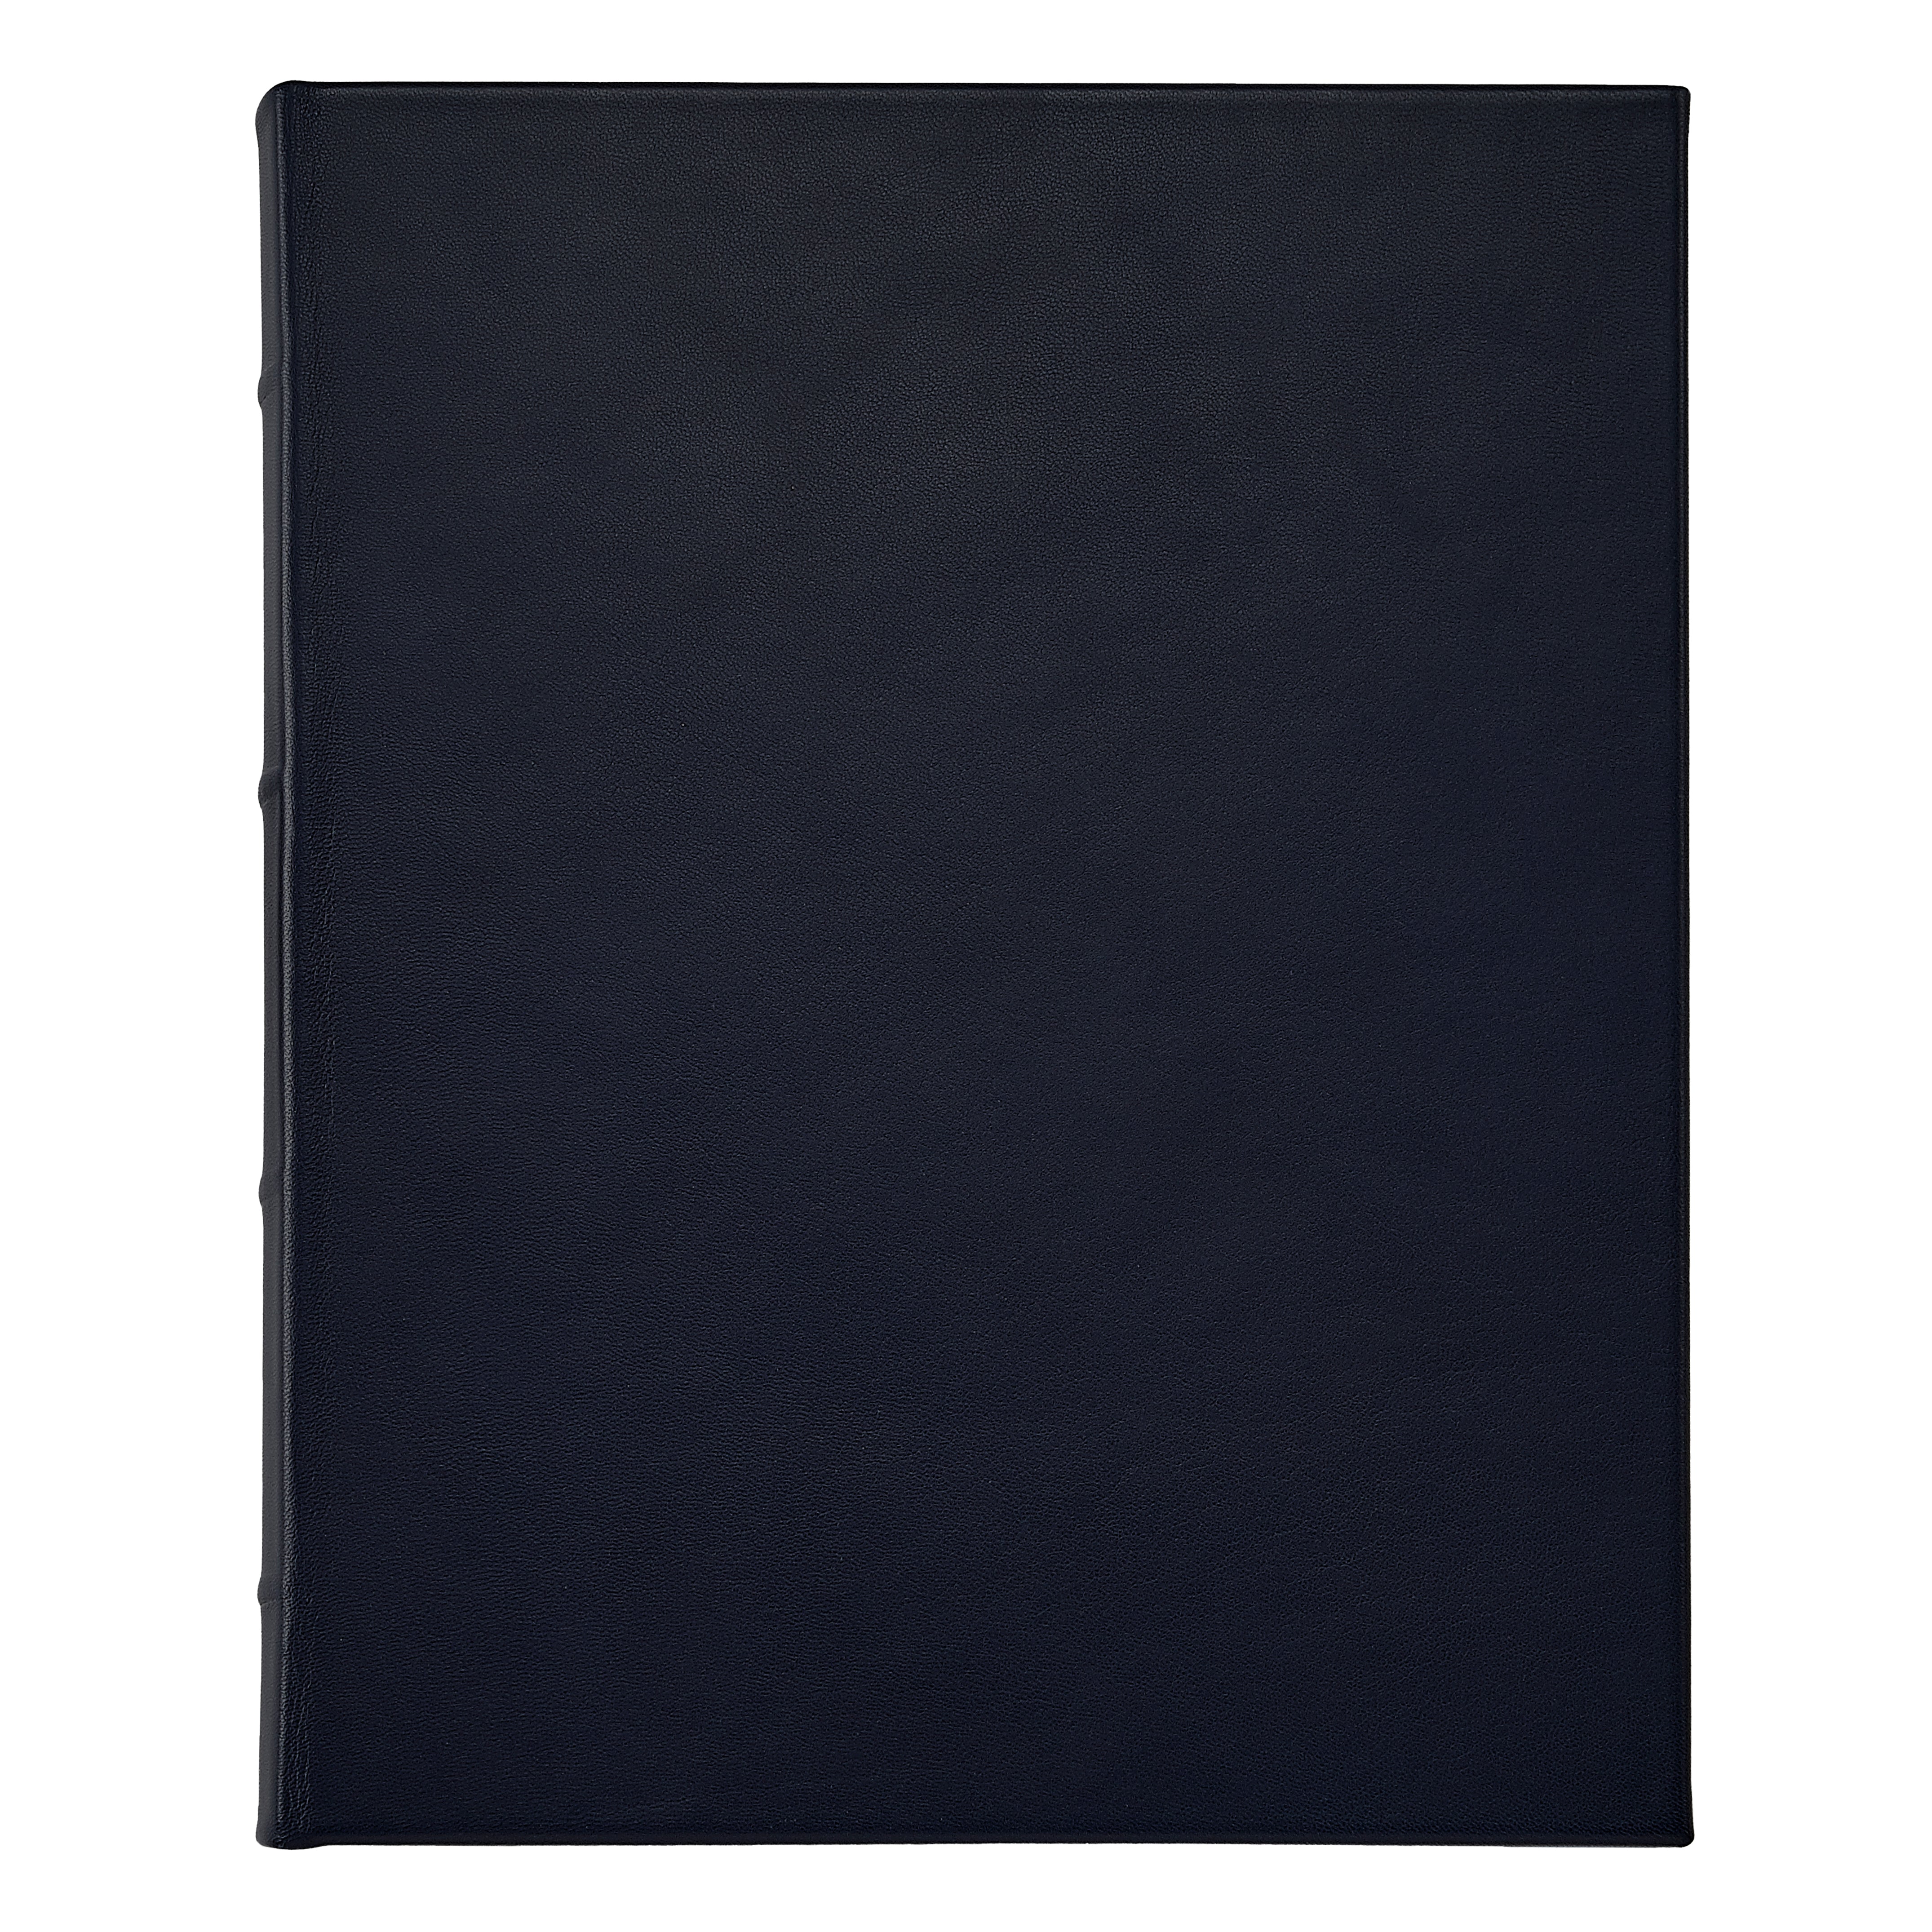 Graphic Image 11 Hardcover Unlined Manuscript Navy Traditional Leather